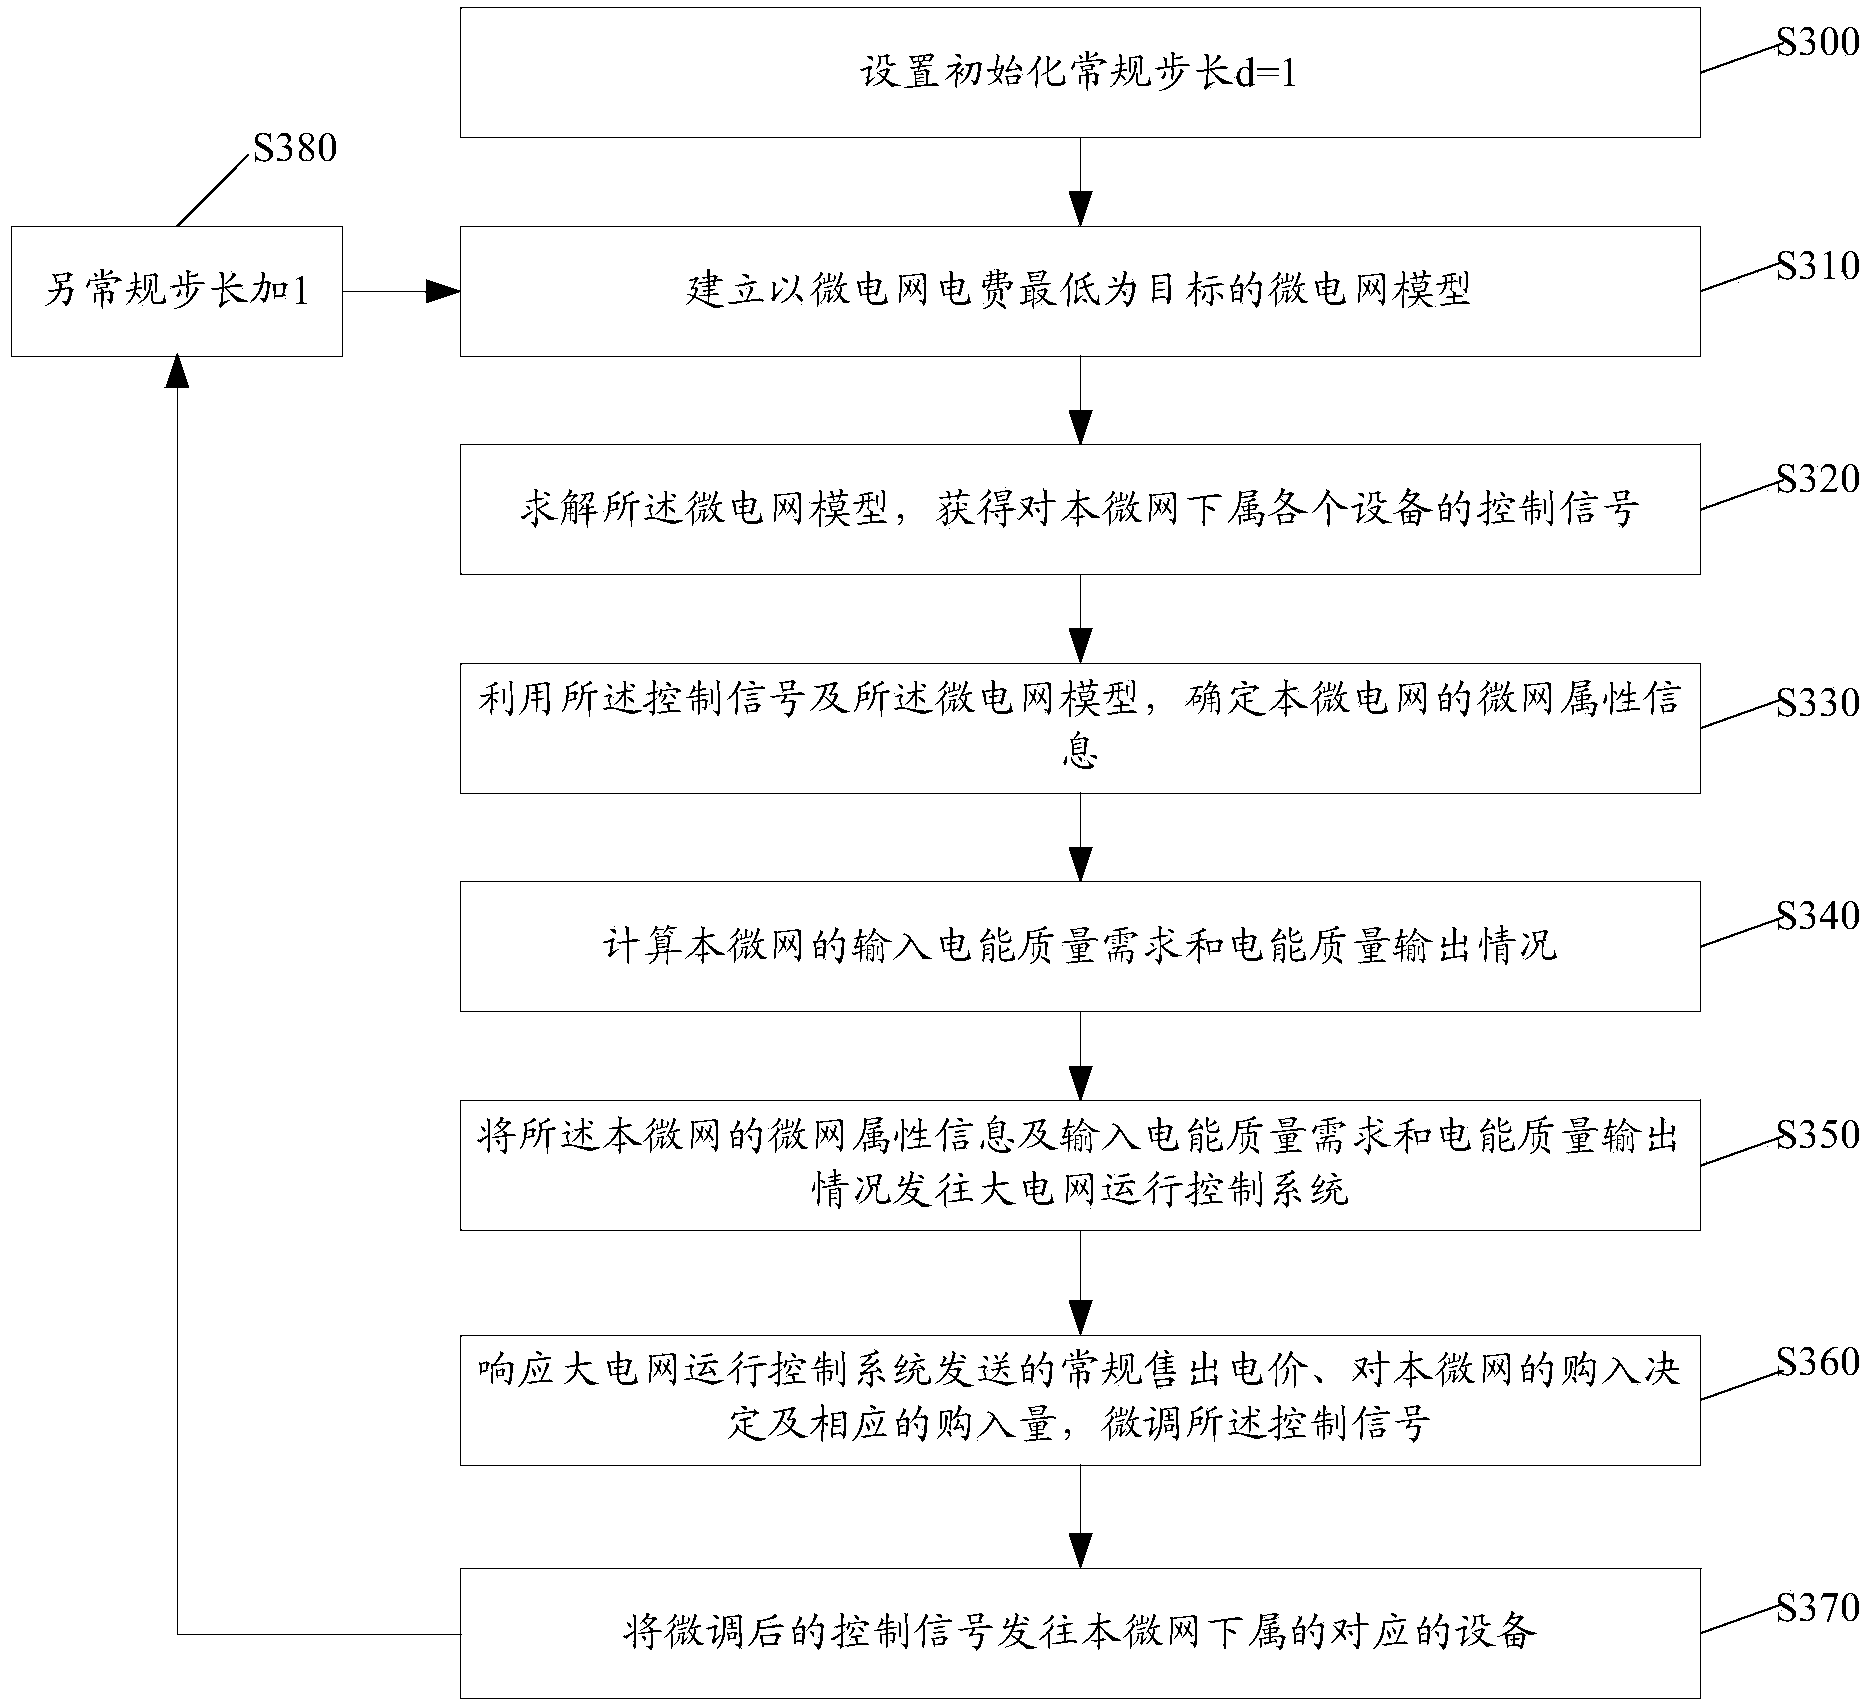 Method and device for information interaction between micro-grids and large grid